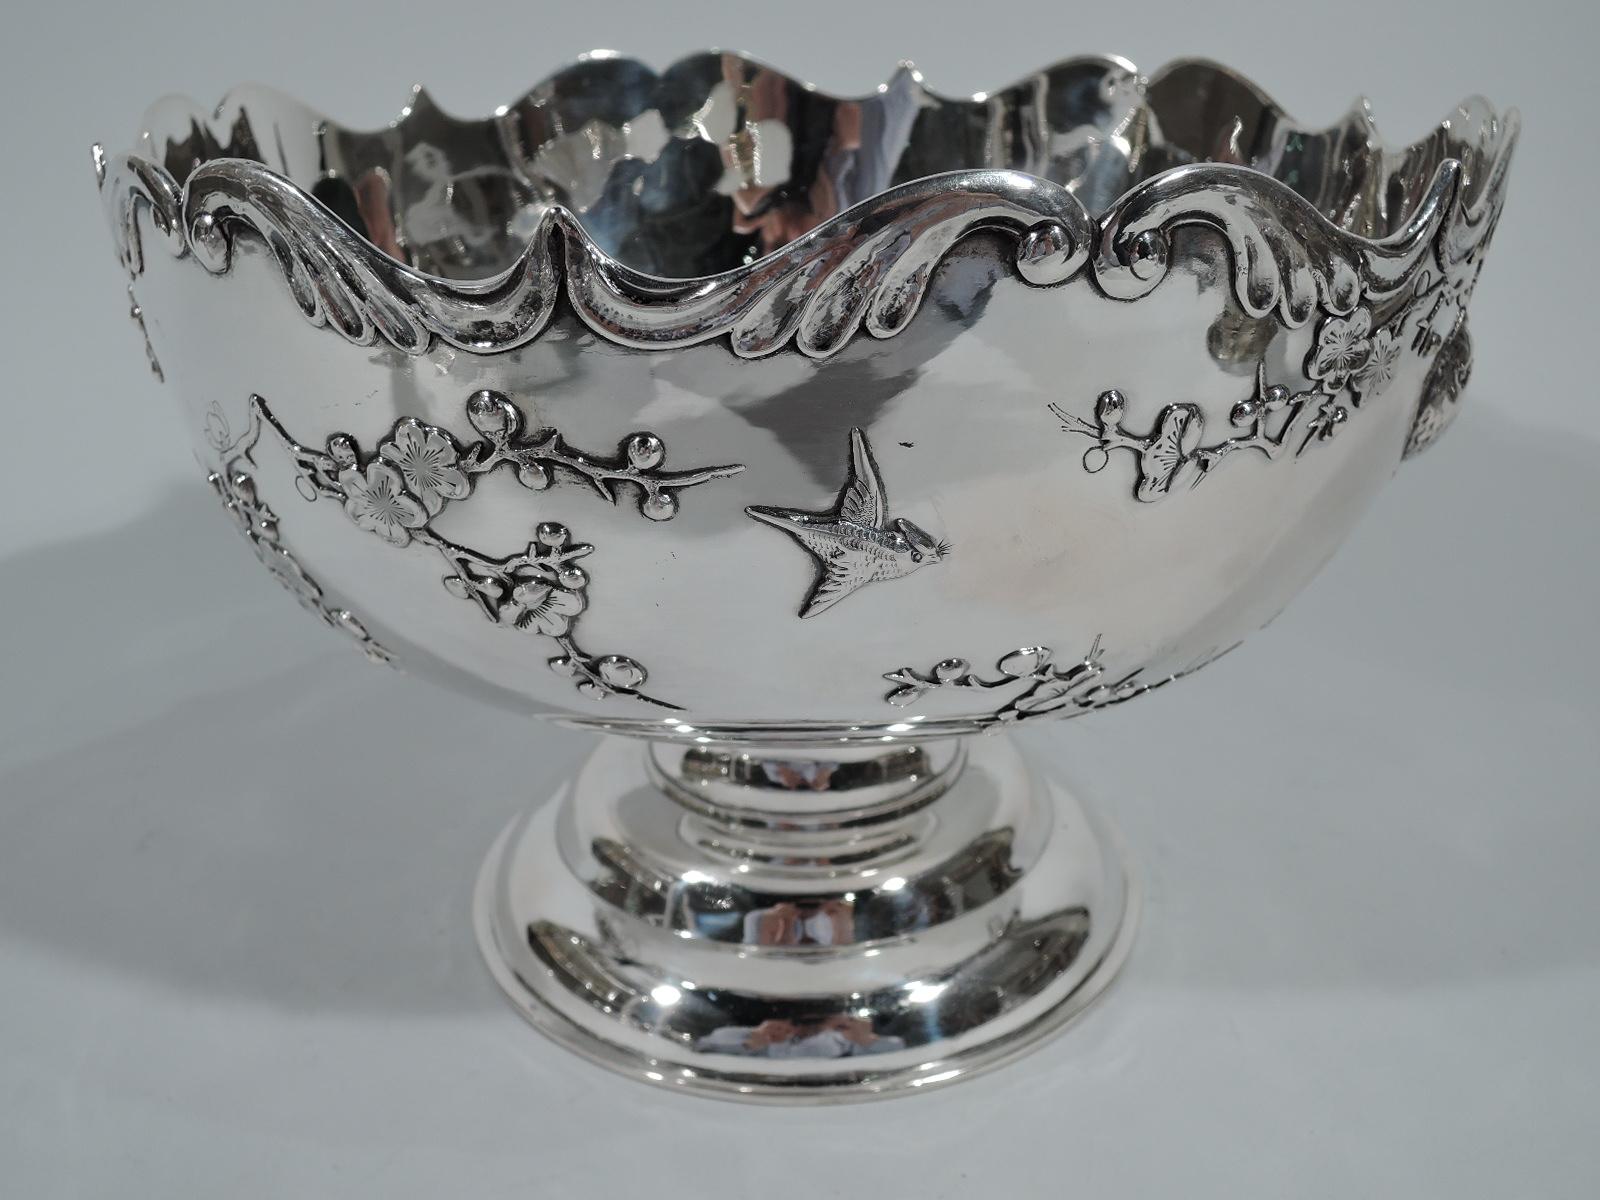 Chinese export silver bowl, circa 1900. Curved sides with scrolled rim, short spool support, and round stepped foot. Spare and elegant ornament applied to bowl exterior: Birds fly and perch on blossoming prunus branches. Nice depiction of the